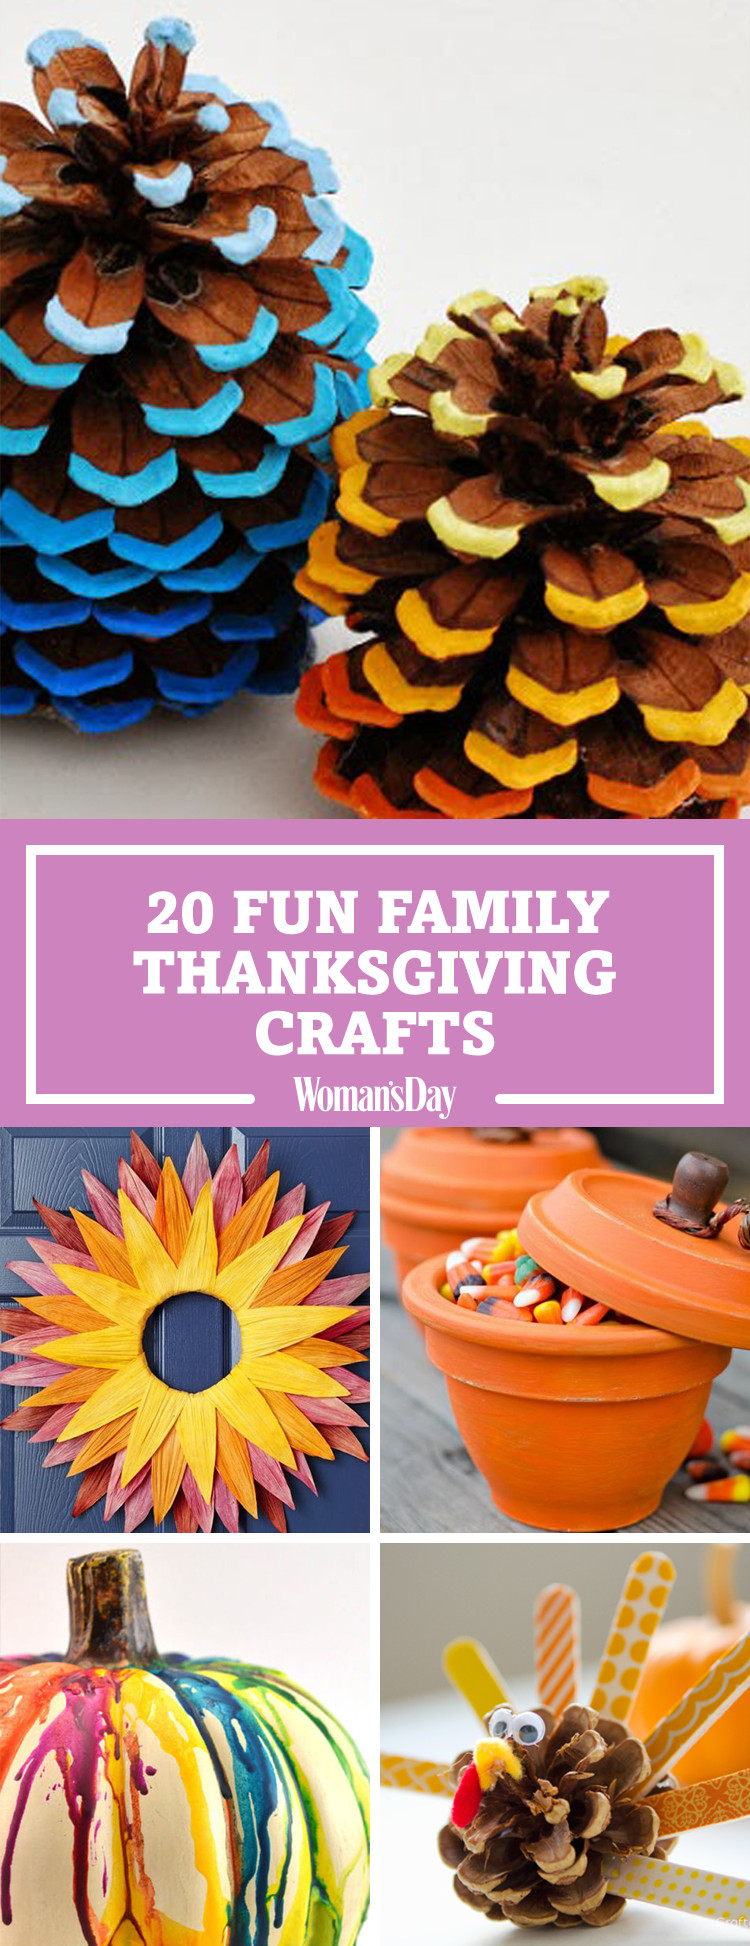 Craft For Kids Thanksgiving
 29 Fun Thanksgiving Crafts for Kids Easy DIY Ideas to